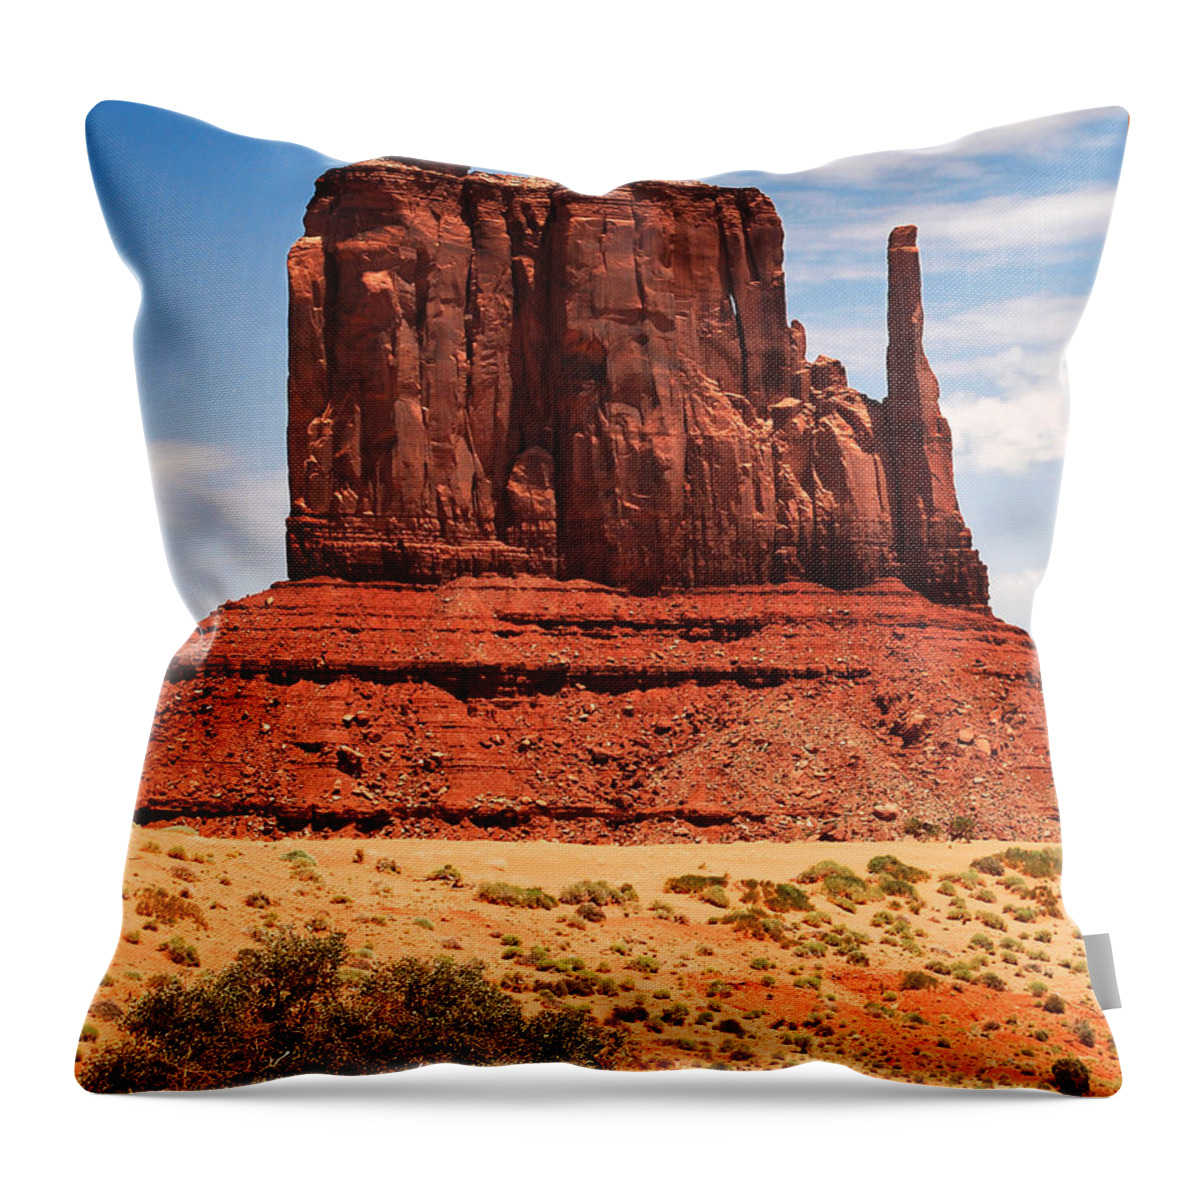 America Throw Pillow featuring the photograph Moument Valley Mitten - Utah/Arizona Border by Gregory Ballos